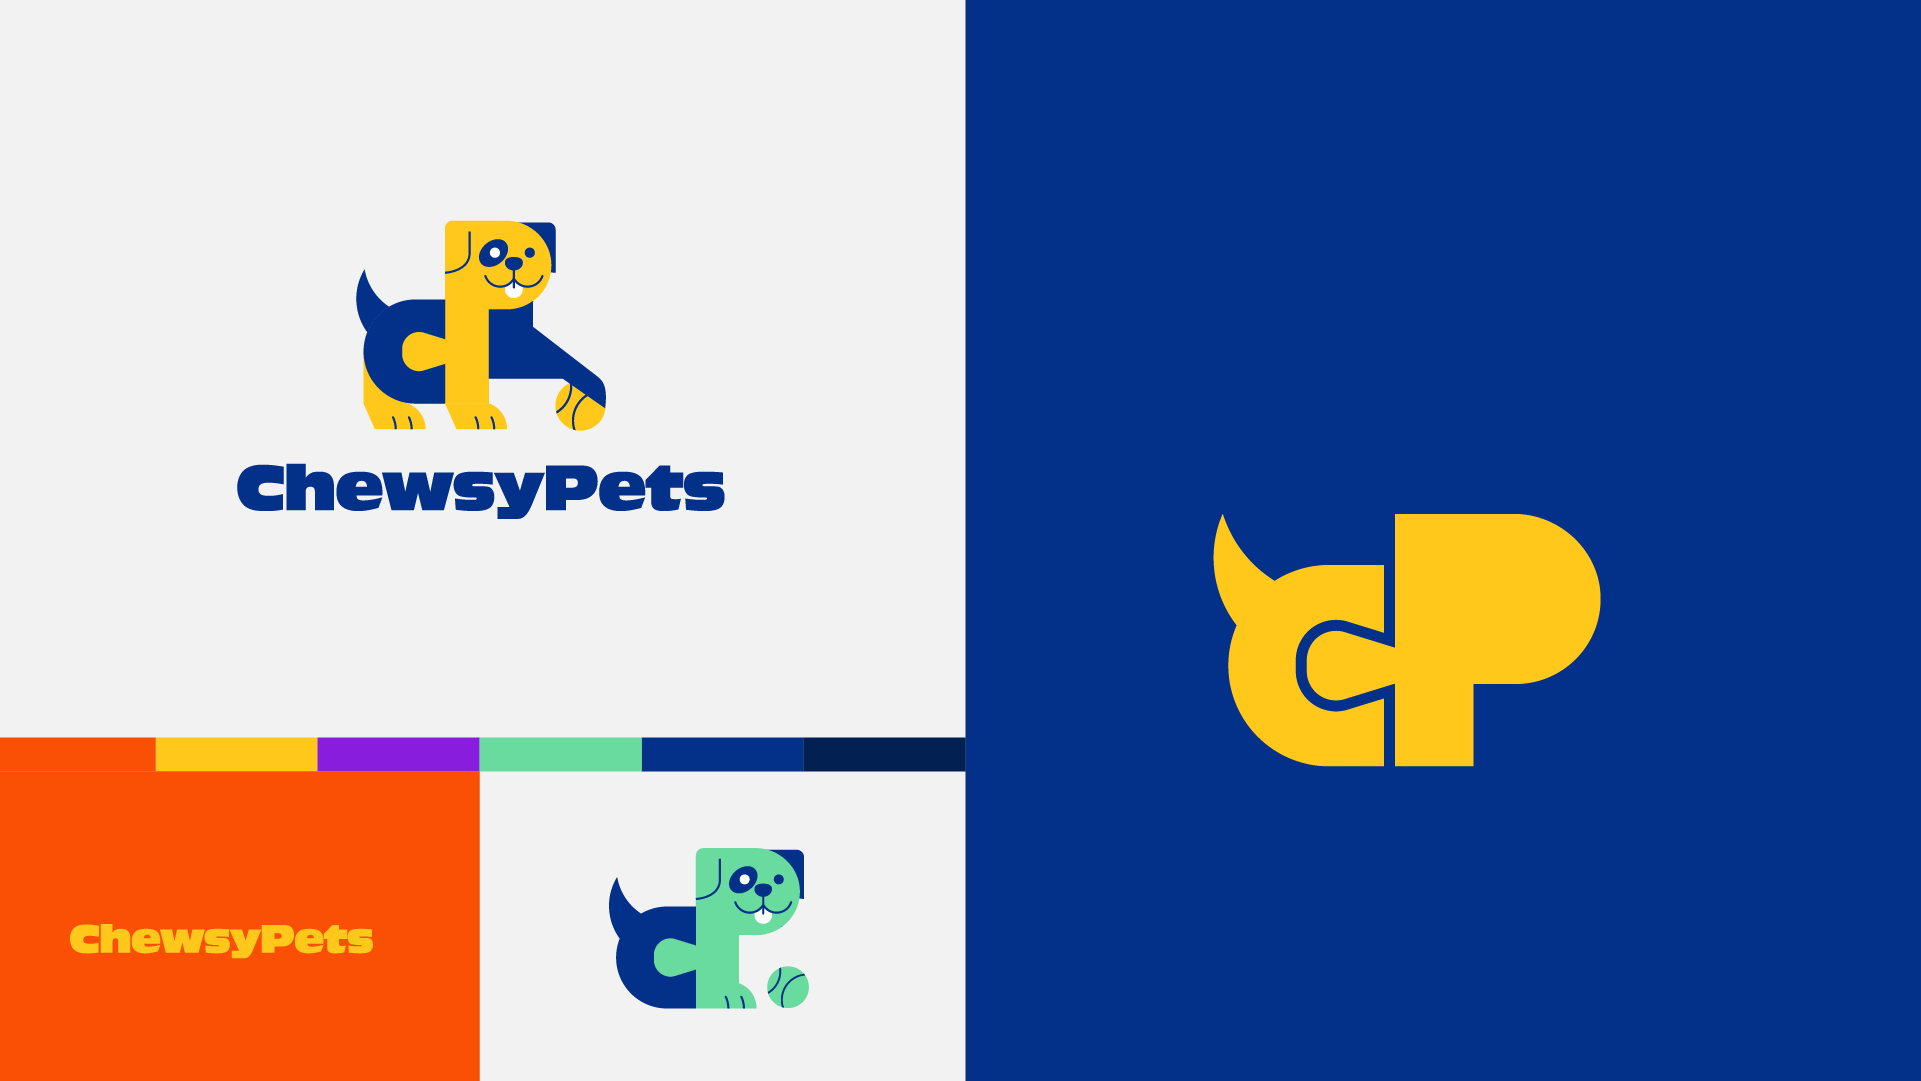 featured image five:ChewsyPets Brand Identity